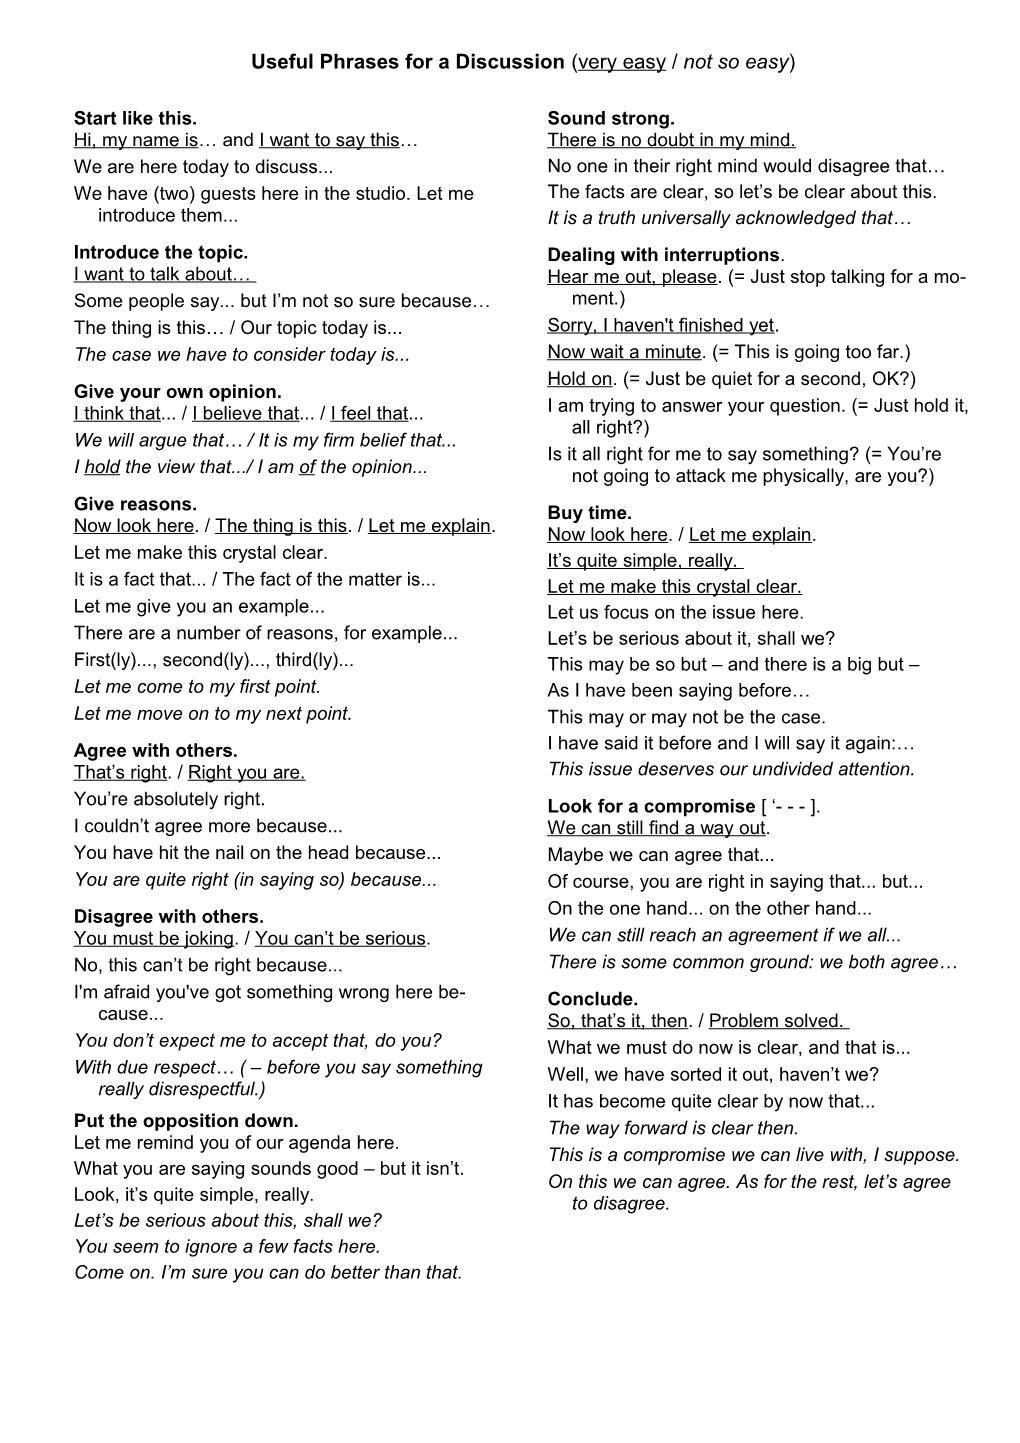 Useful Phrases for a Discussion (Very Easy/ Not So Easy)